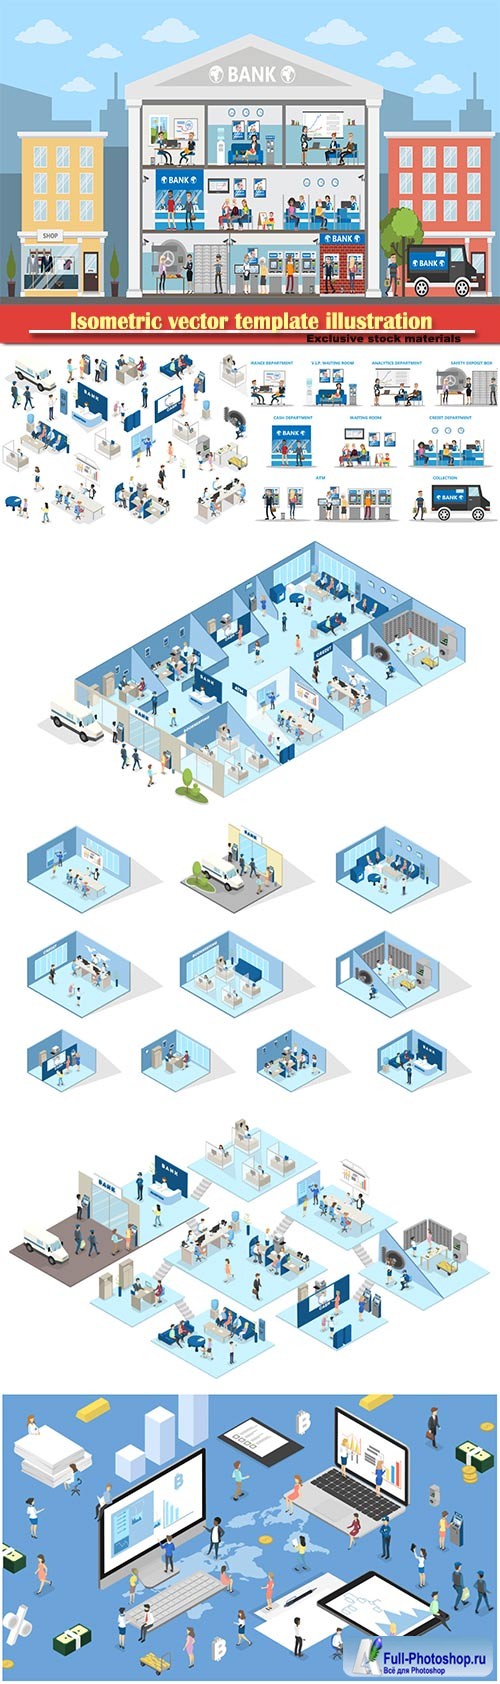 Isometric vector template business illustration # 45